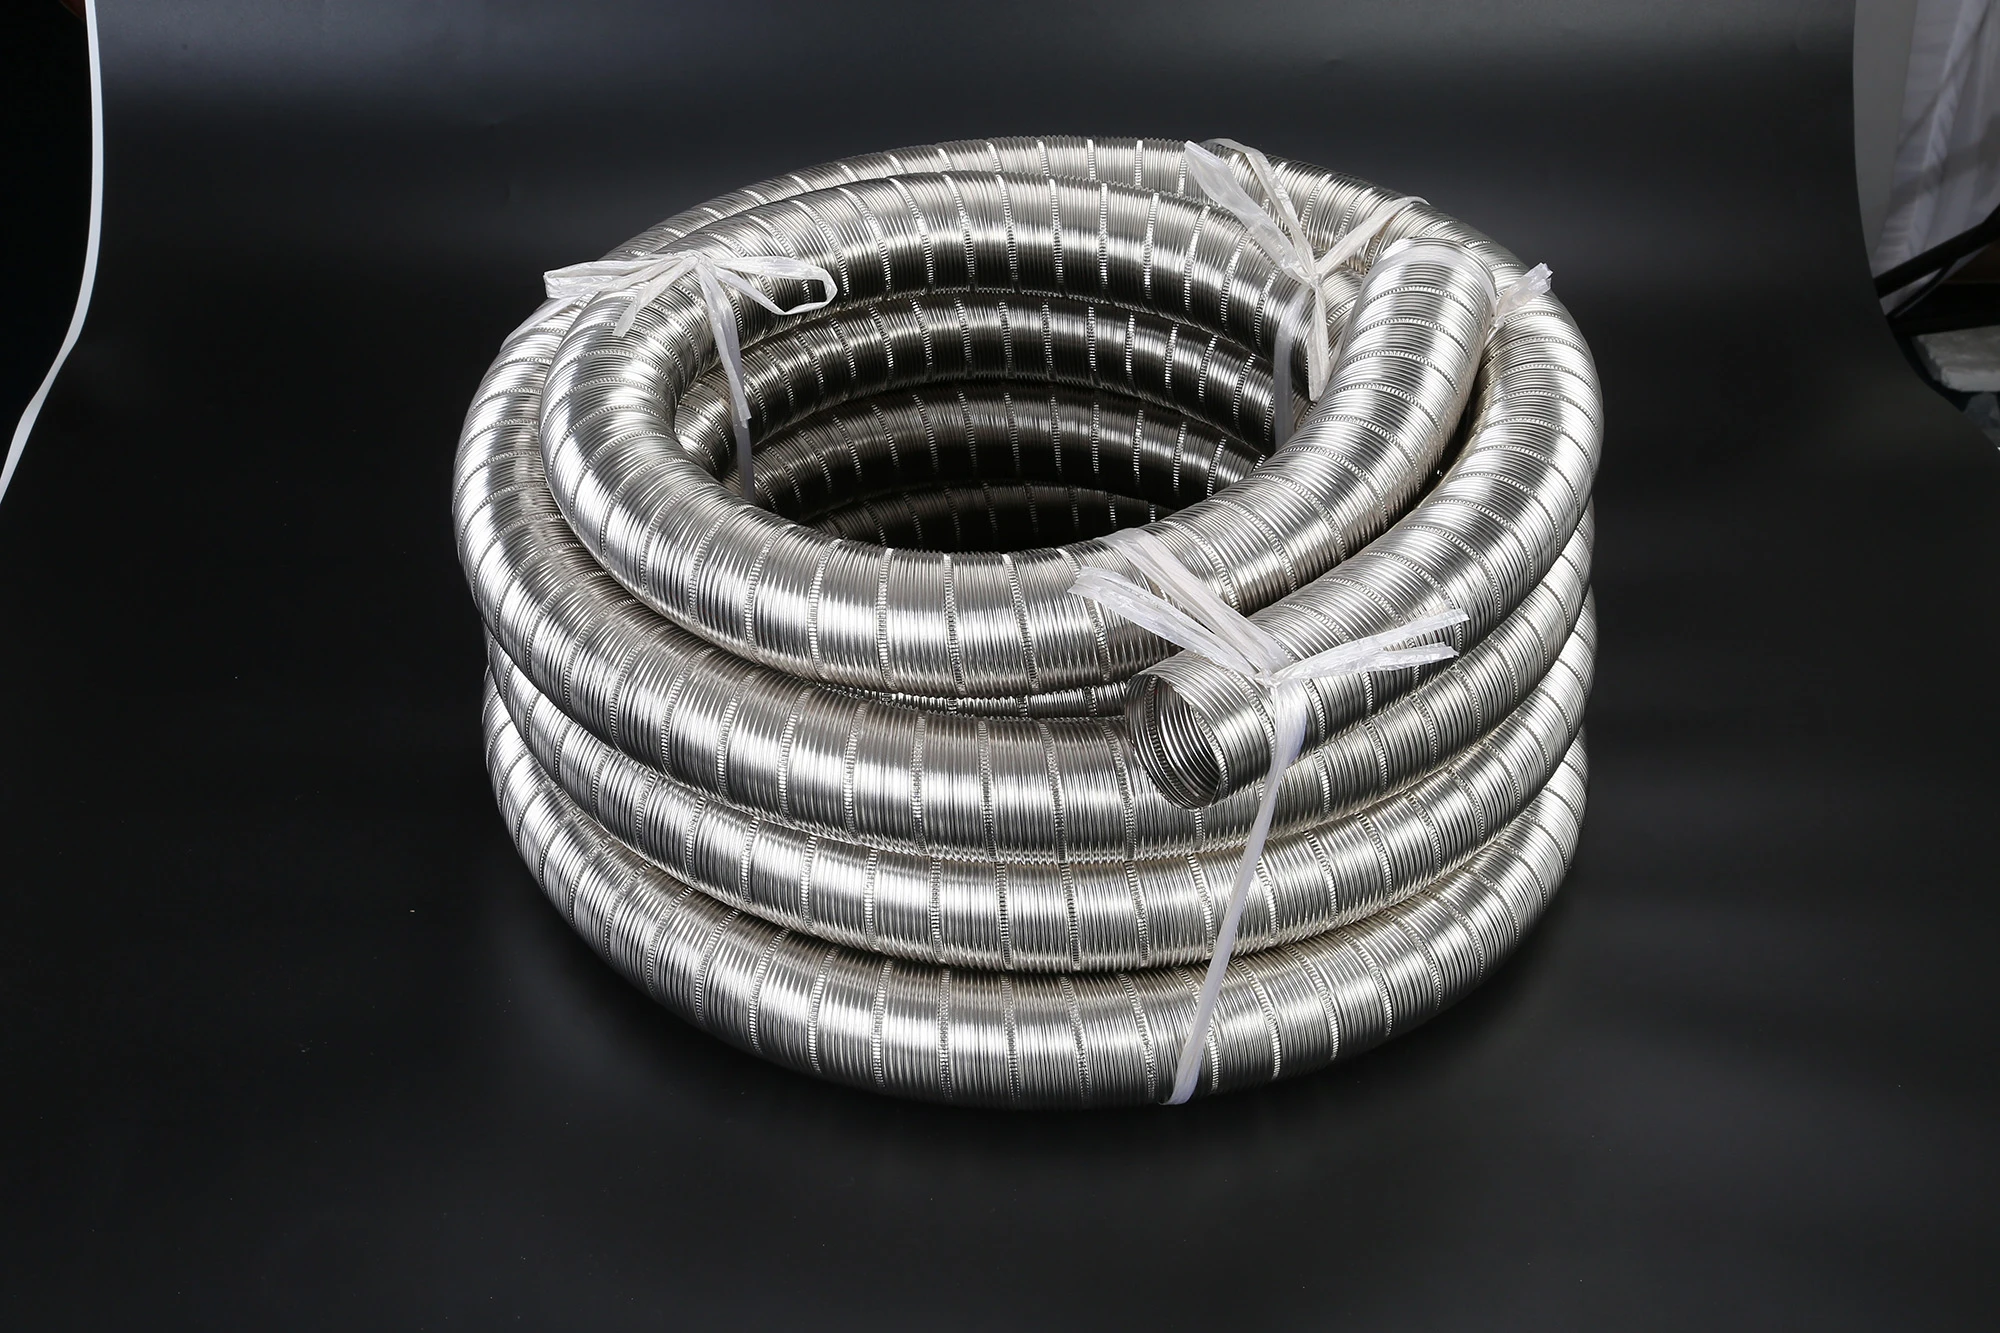 HVAC system stainless steel flexible duct